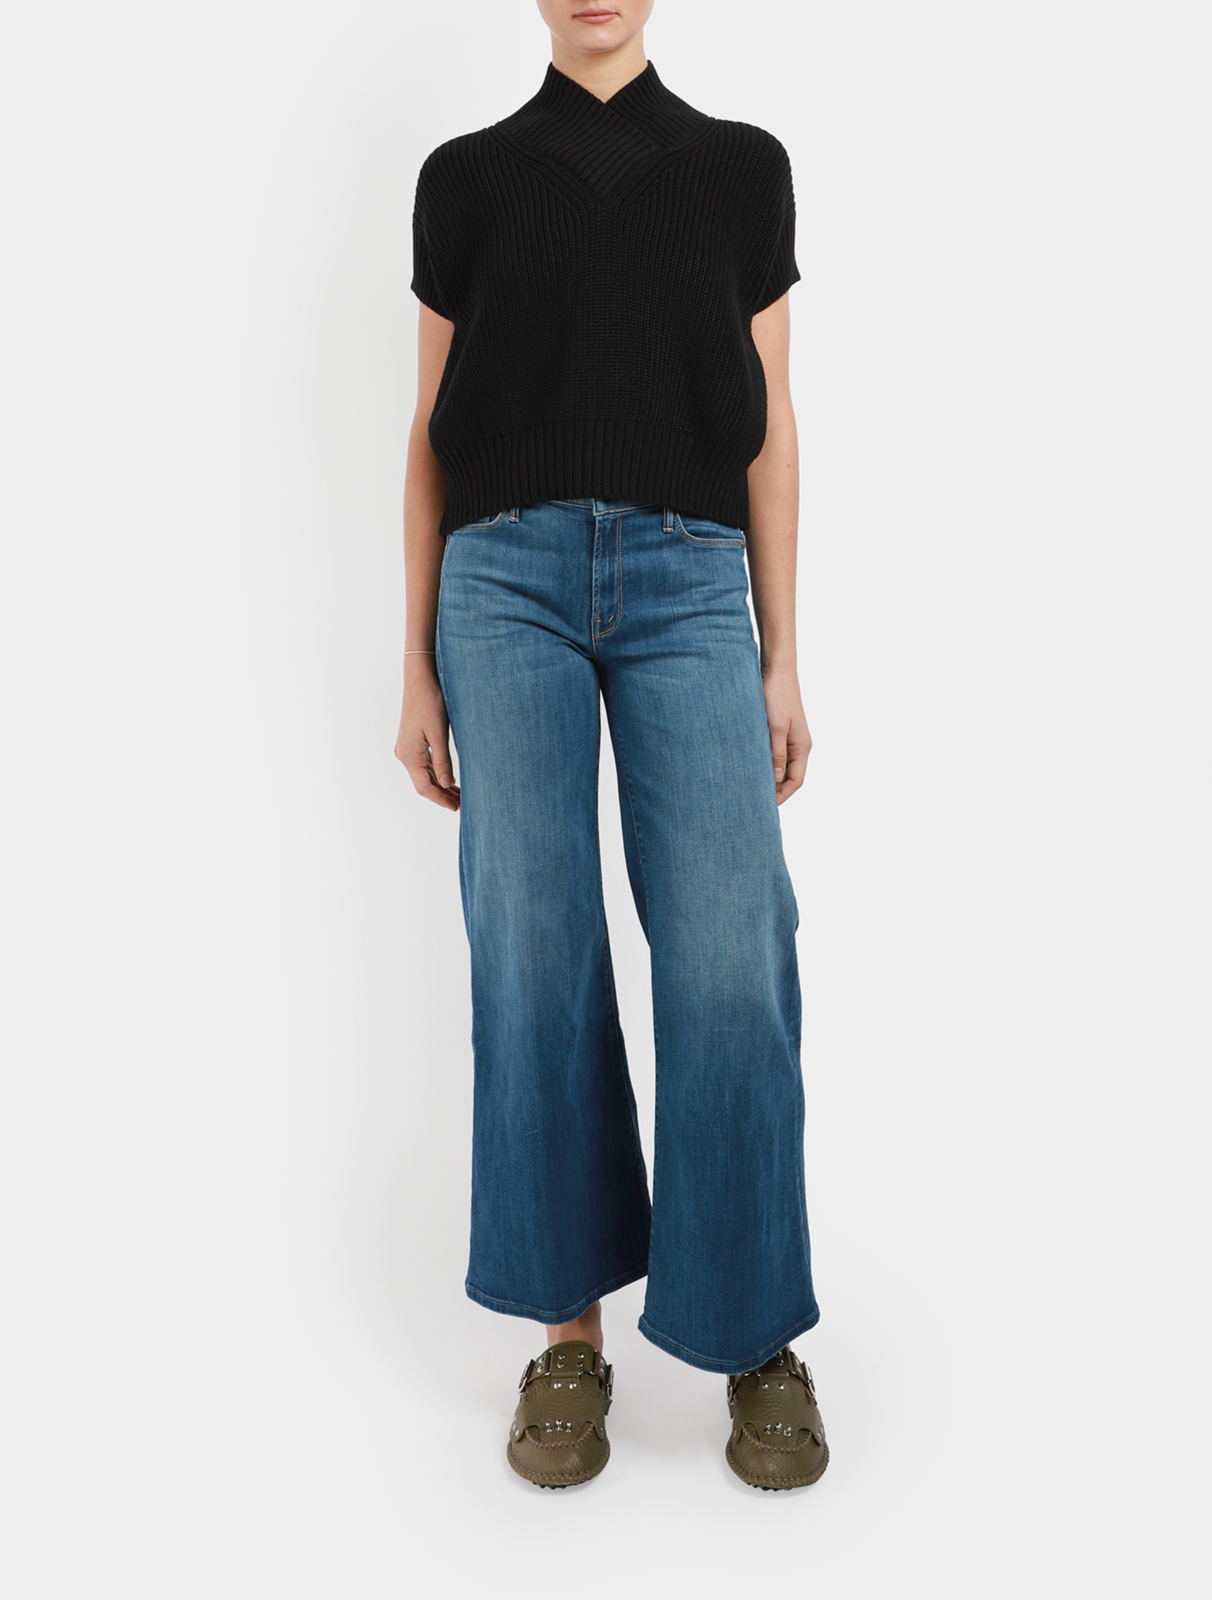 The Down Low Twister Ankle Jeans